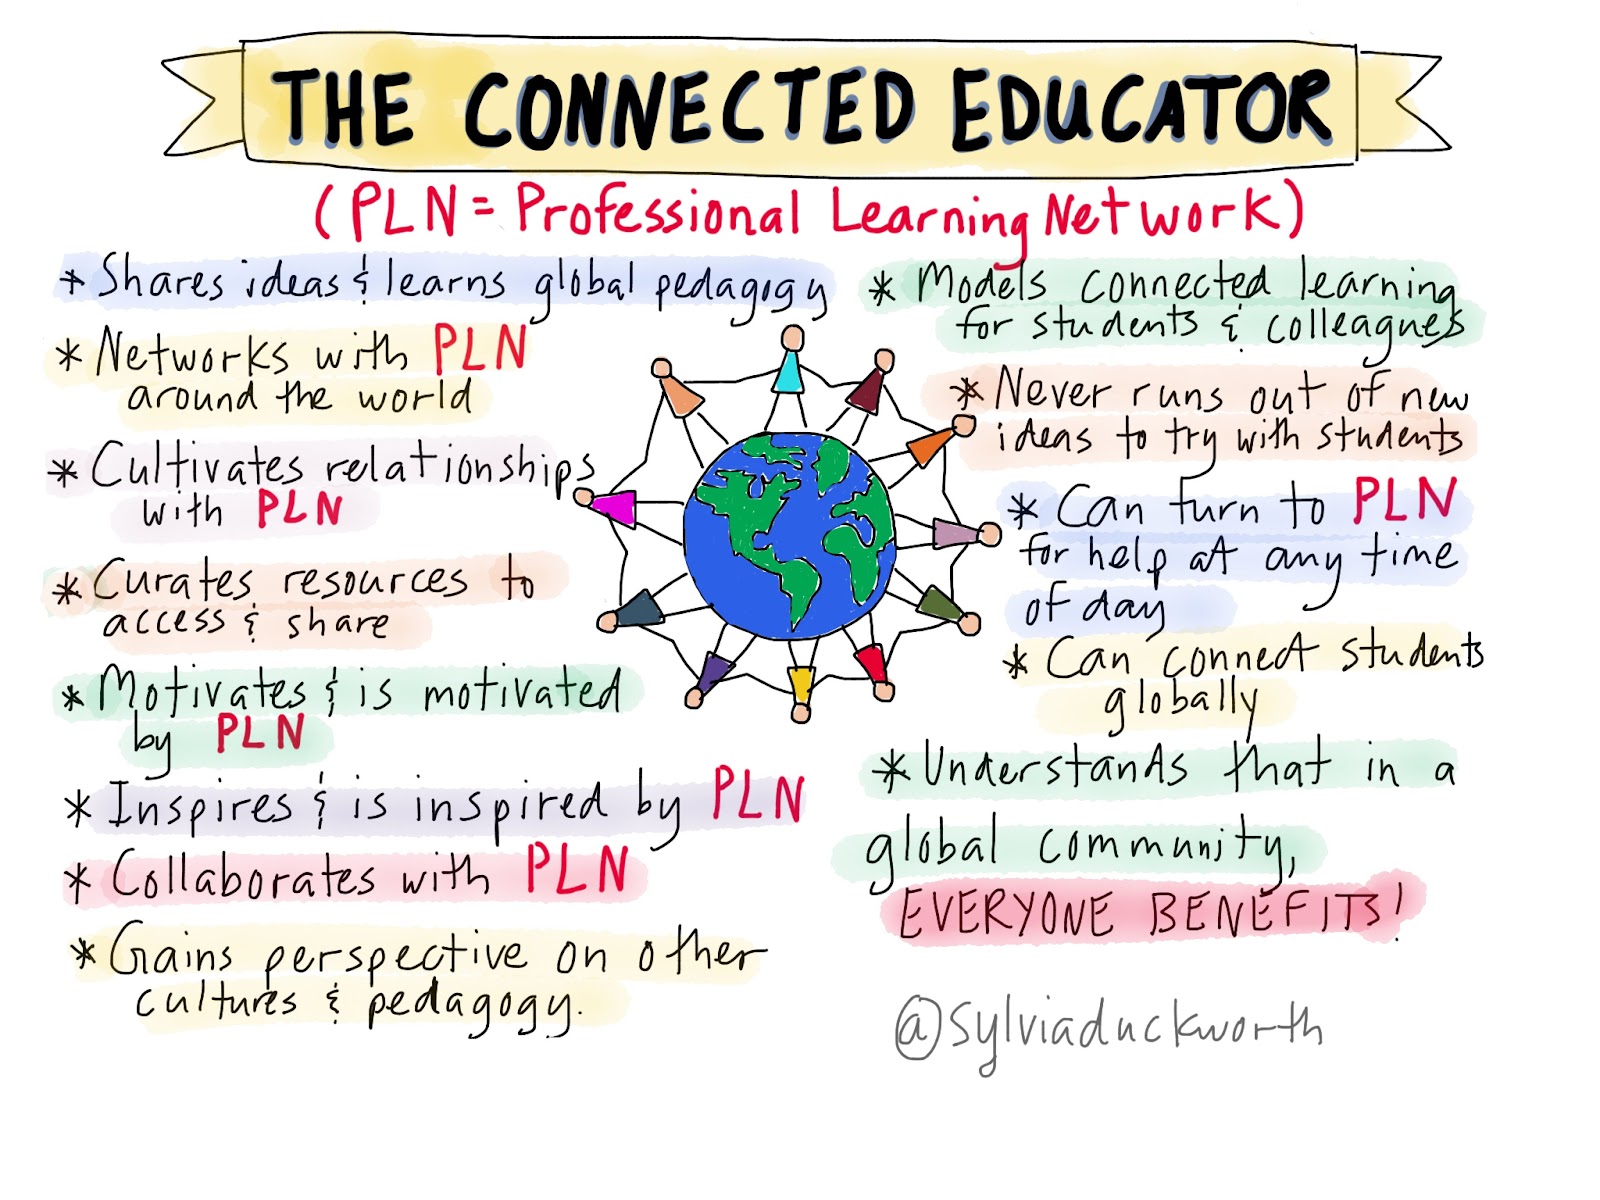 The Connected Educator.jpg